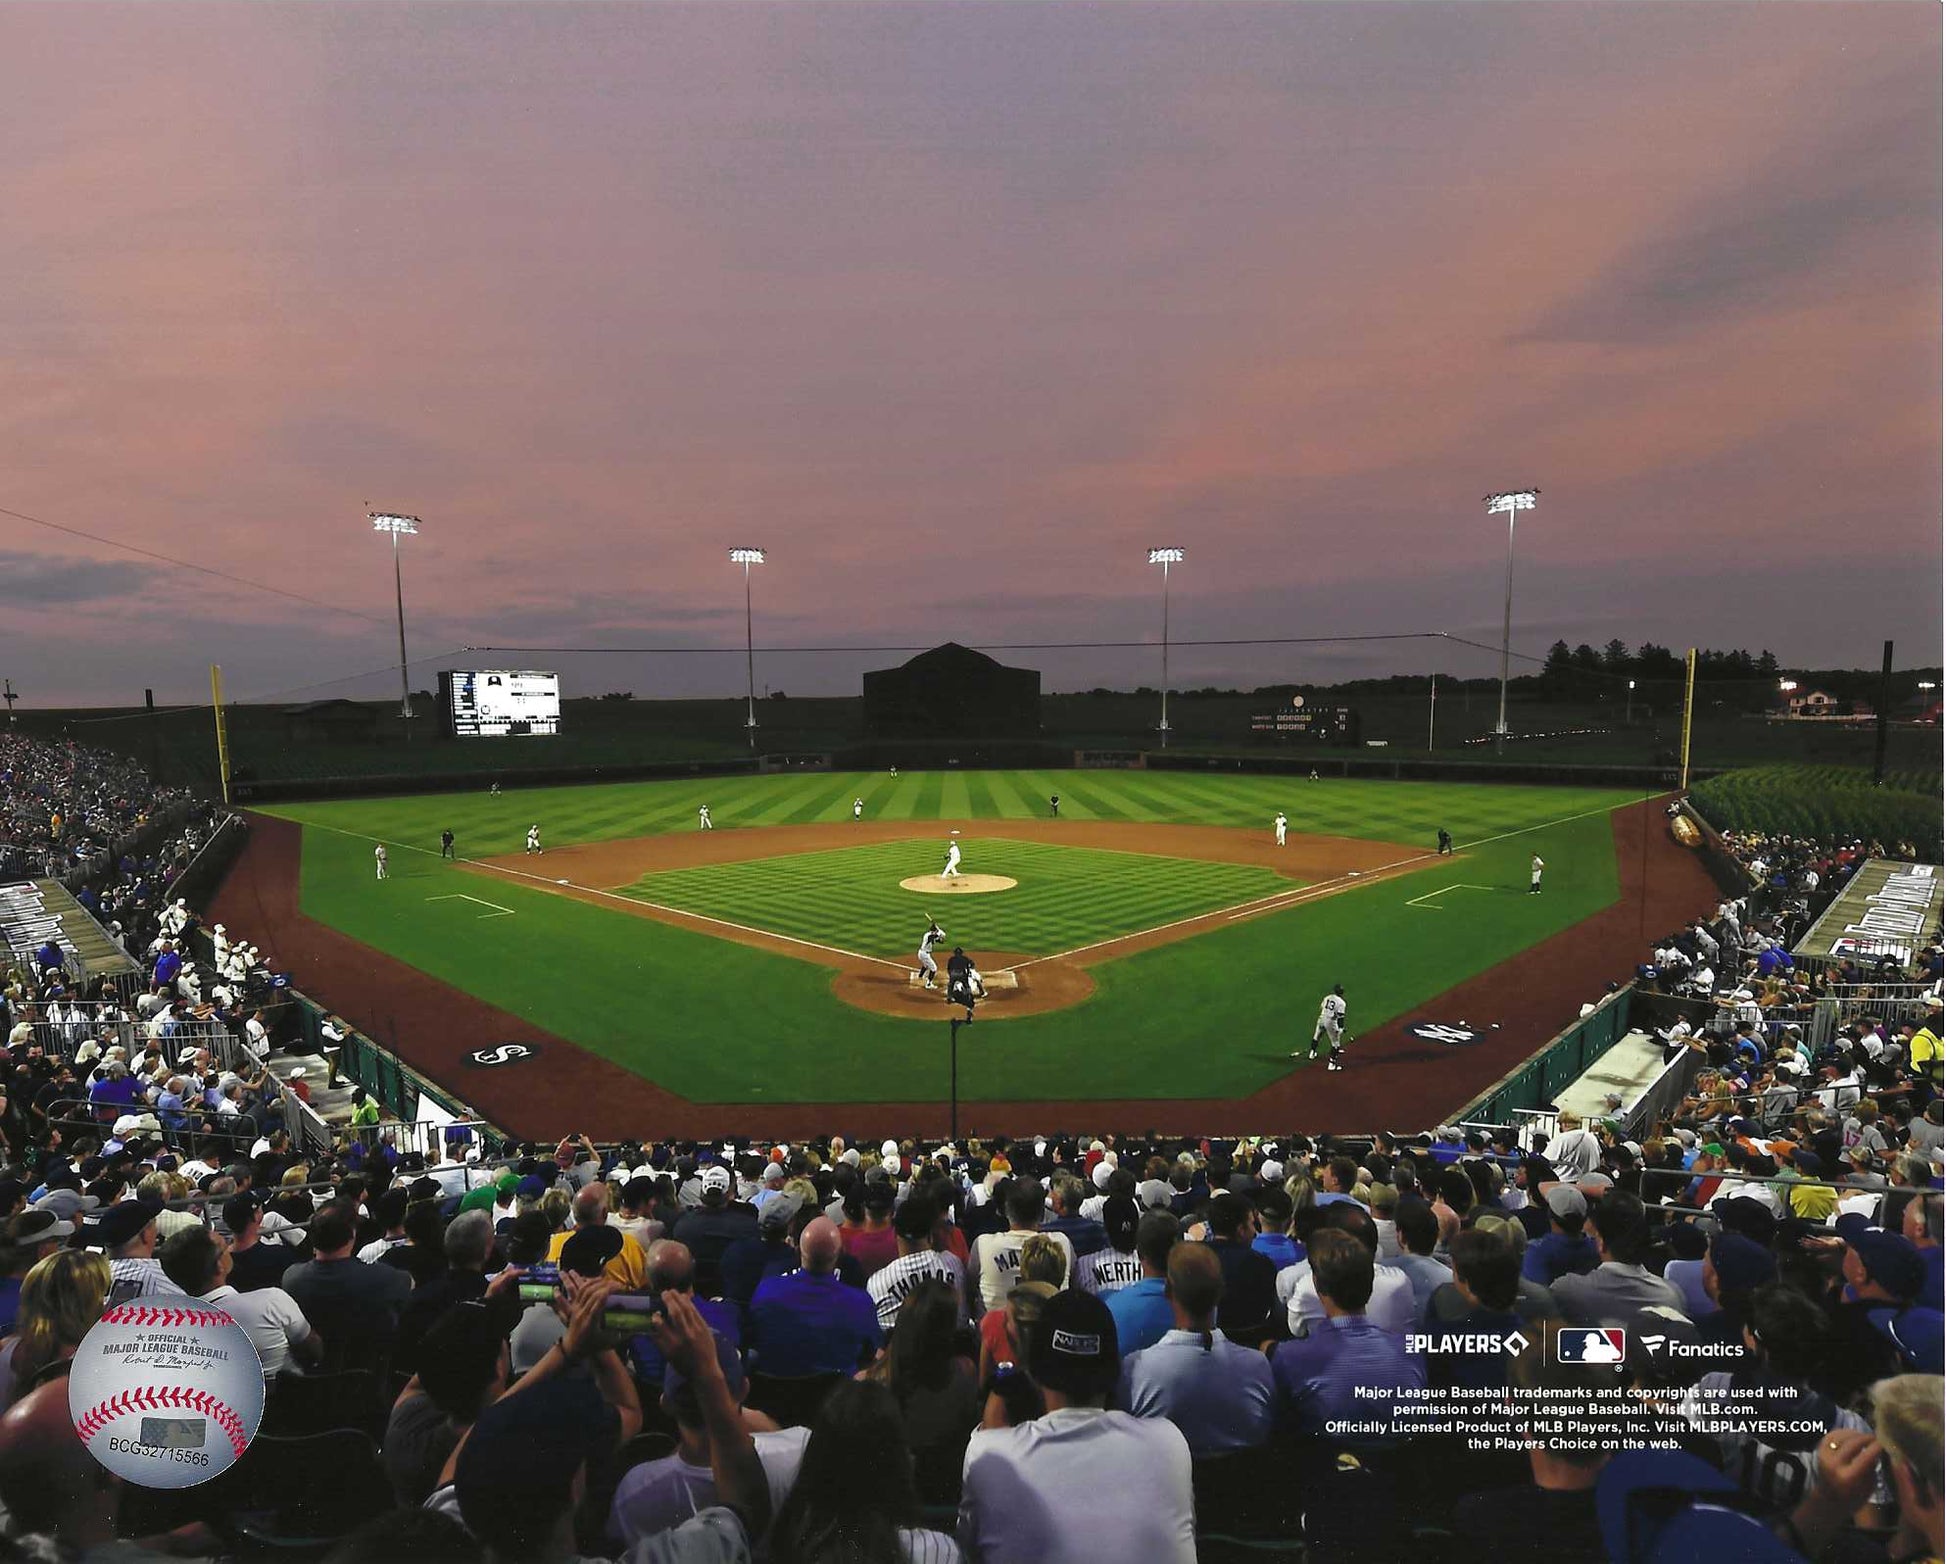 The Field Of Dreams Field On August 12, 2021 The N.Y. Yankees vs The Chicago White Sox. 8x10 Photo Picture